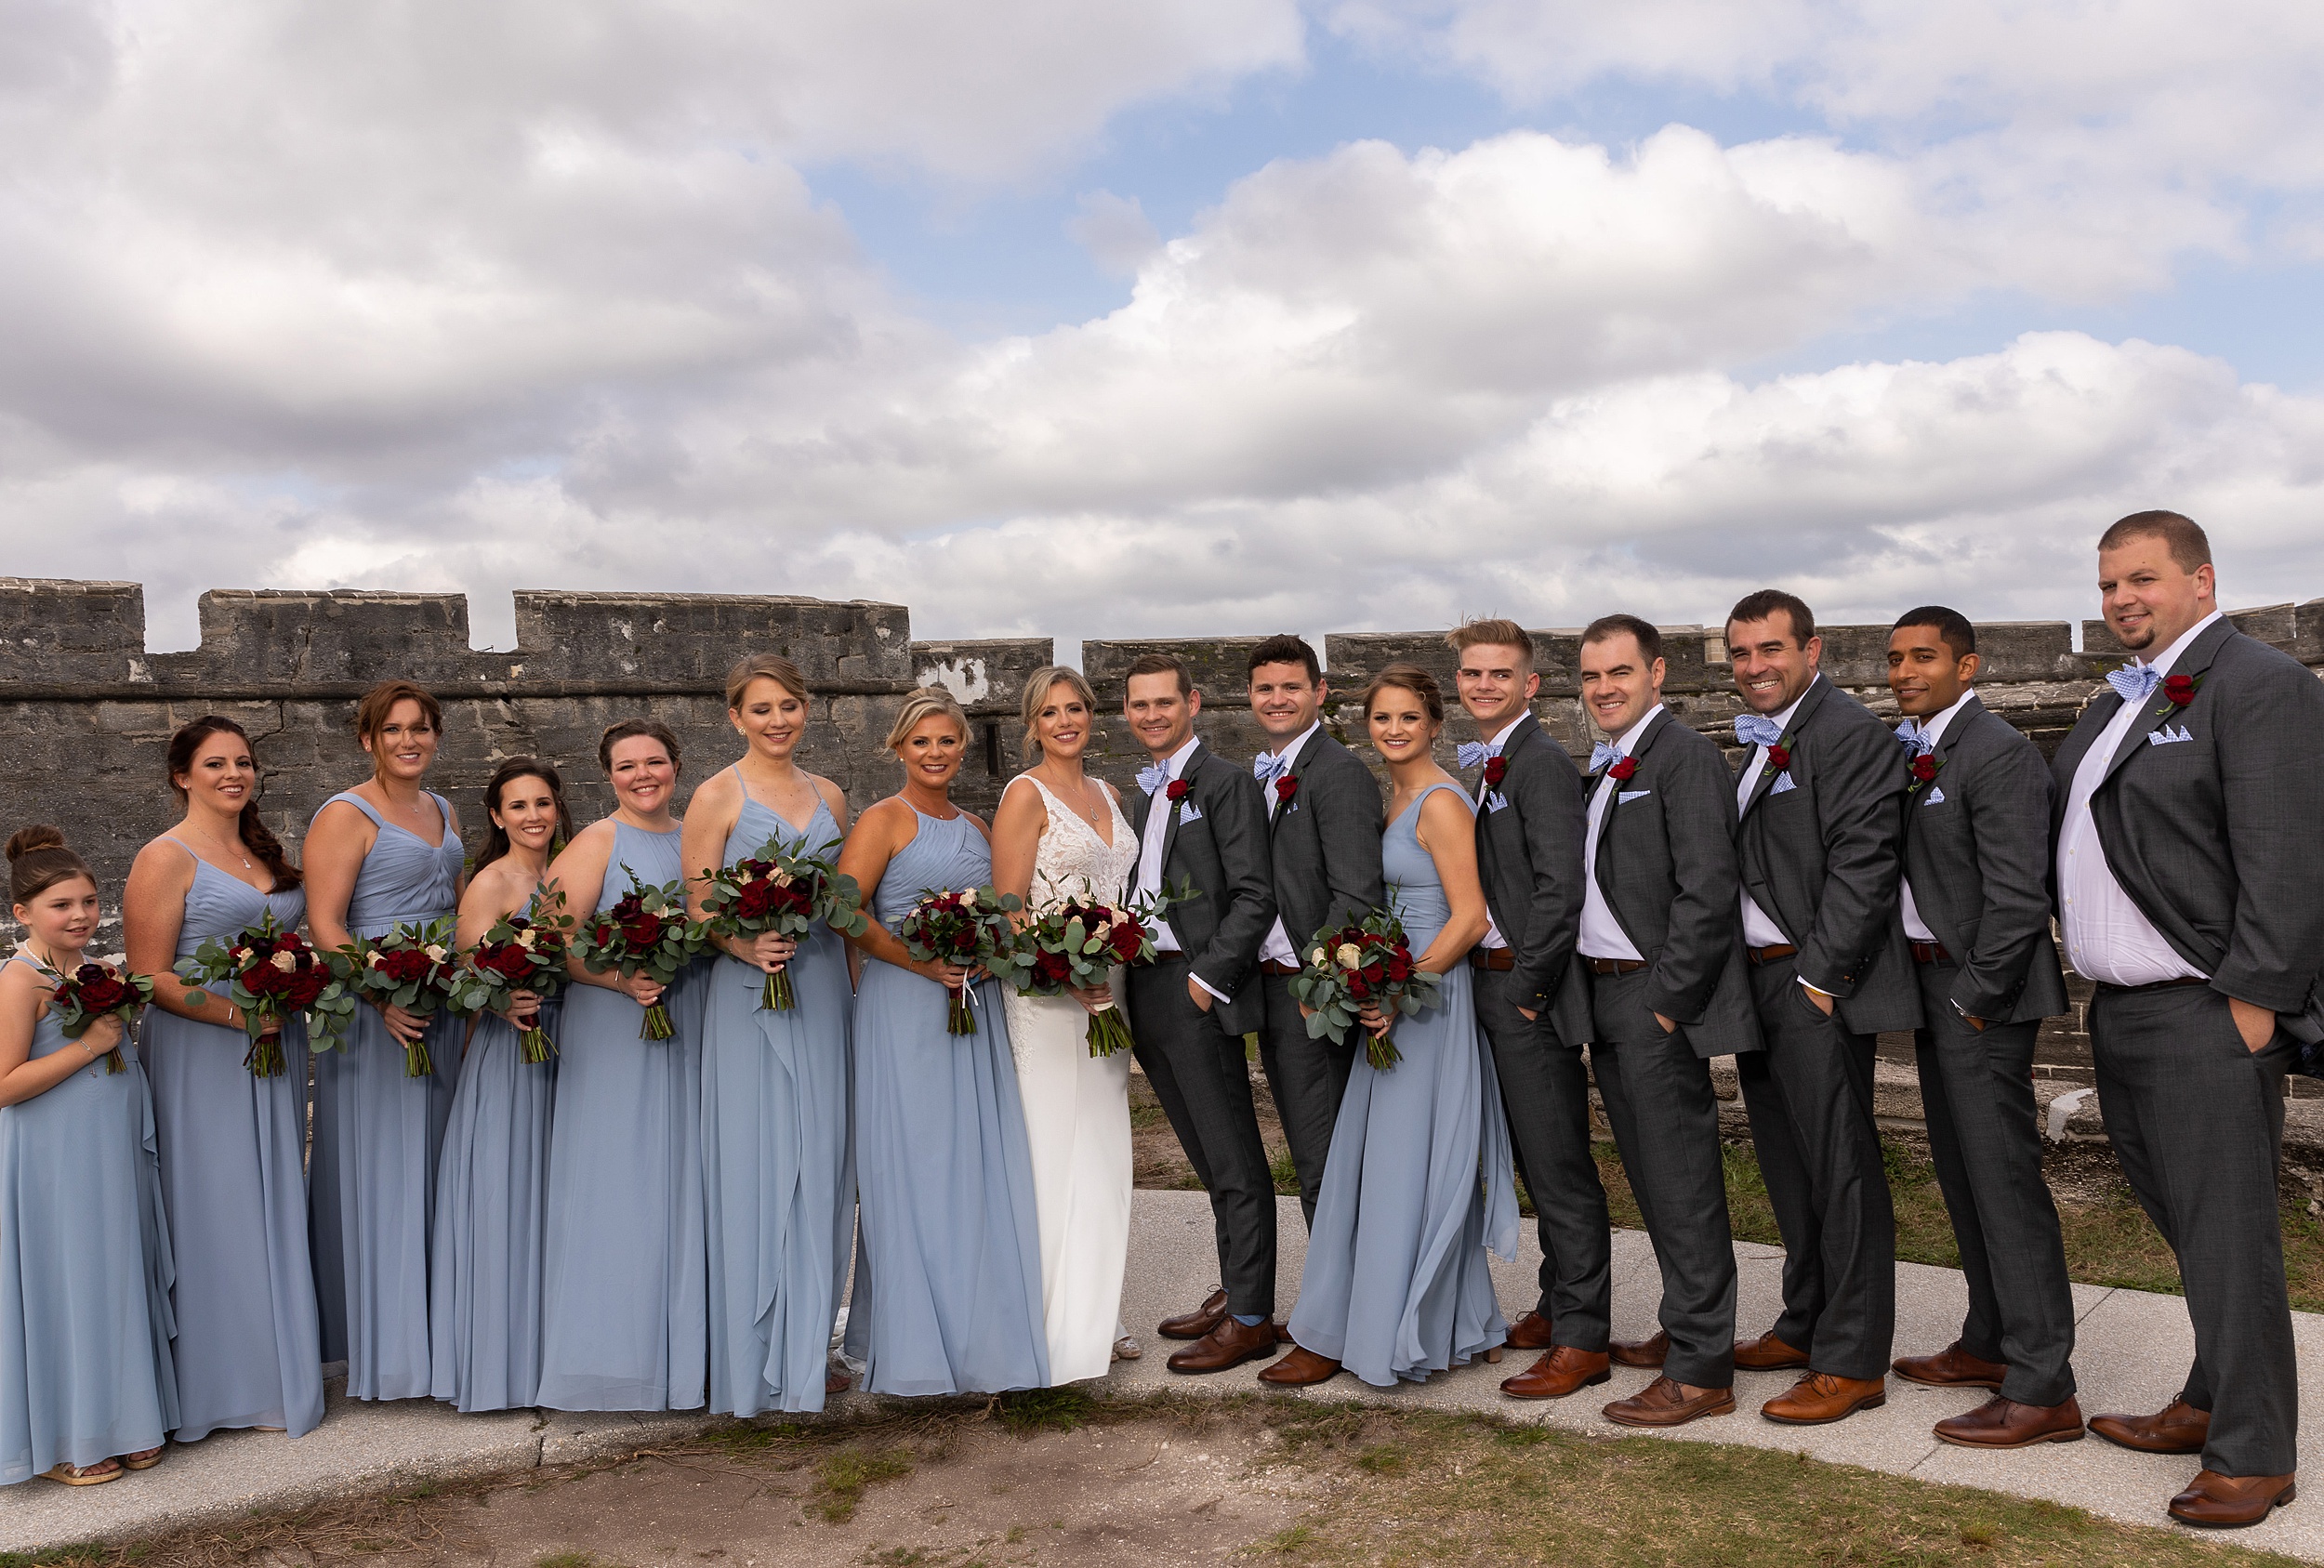 Newlyweds stand with their large wedding party by old walls on a sidewalk at their river house events wedding